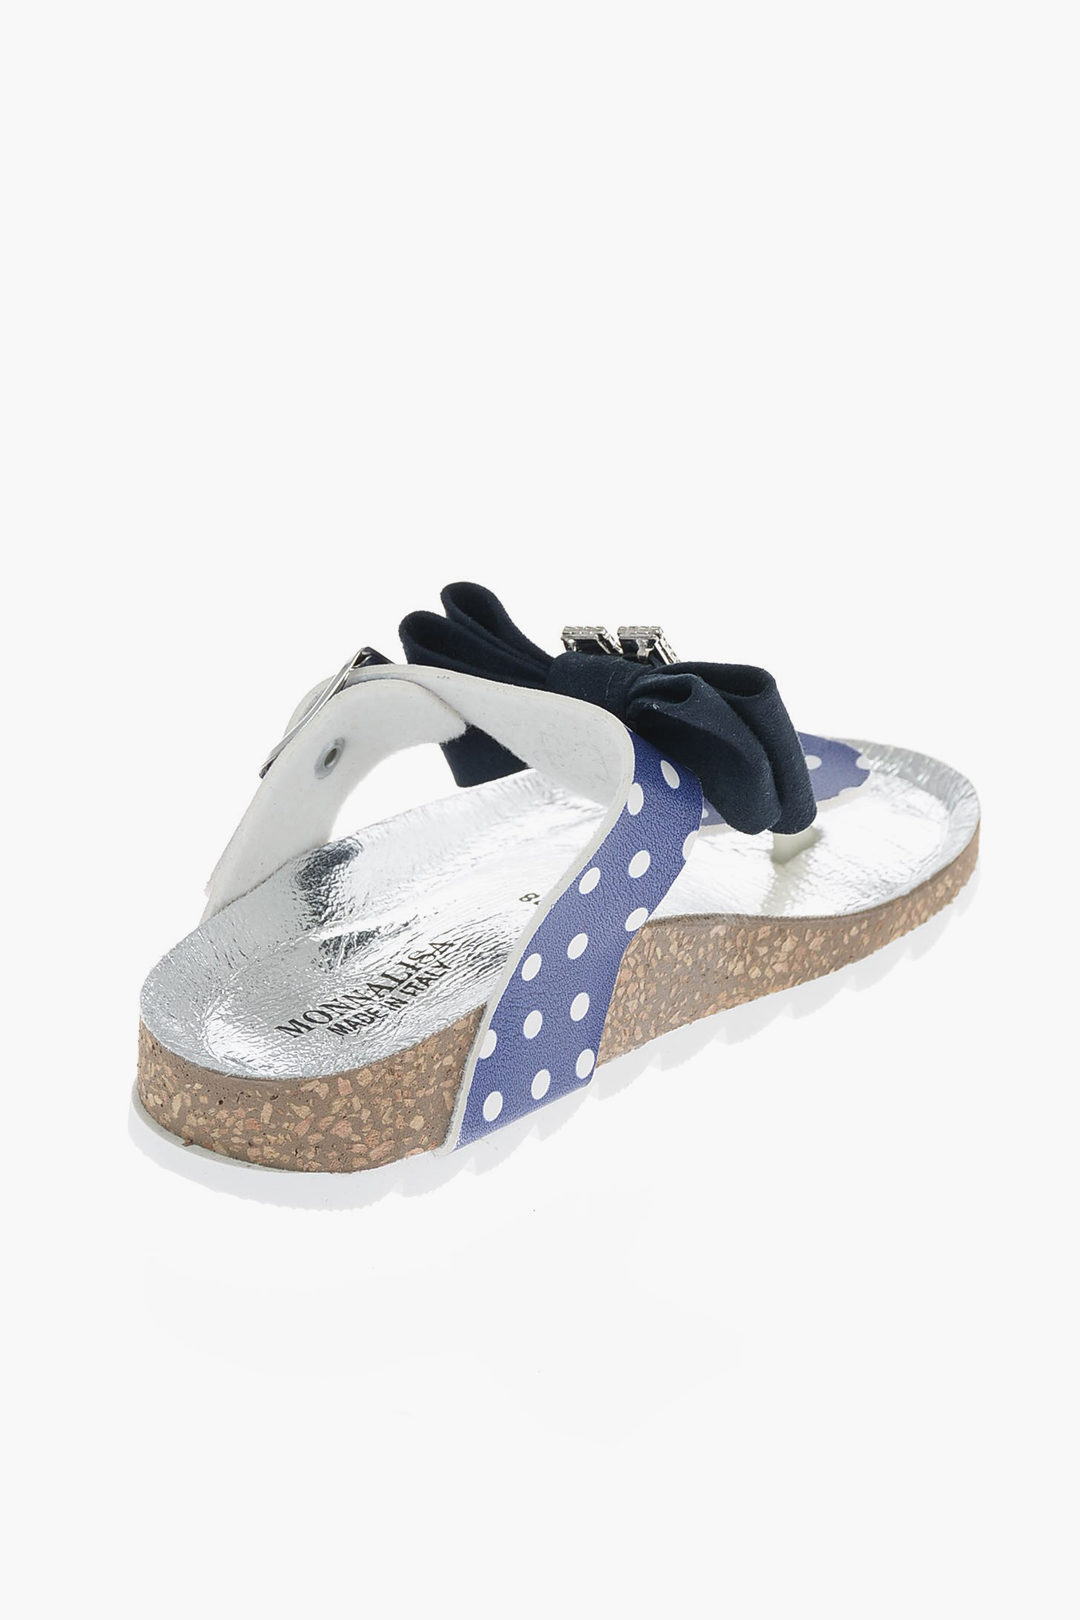 Monnalisa Sandal with Bow girls - Glamood Outlet